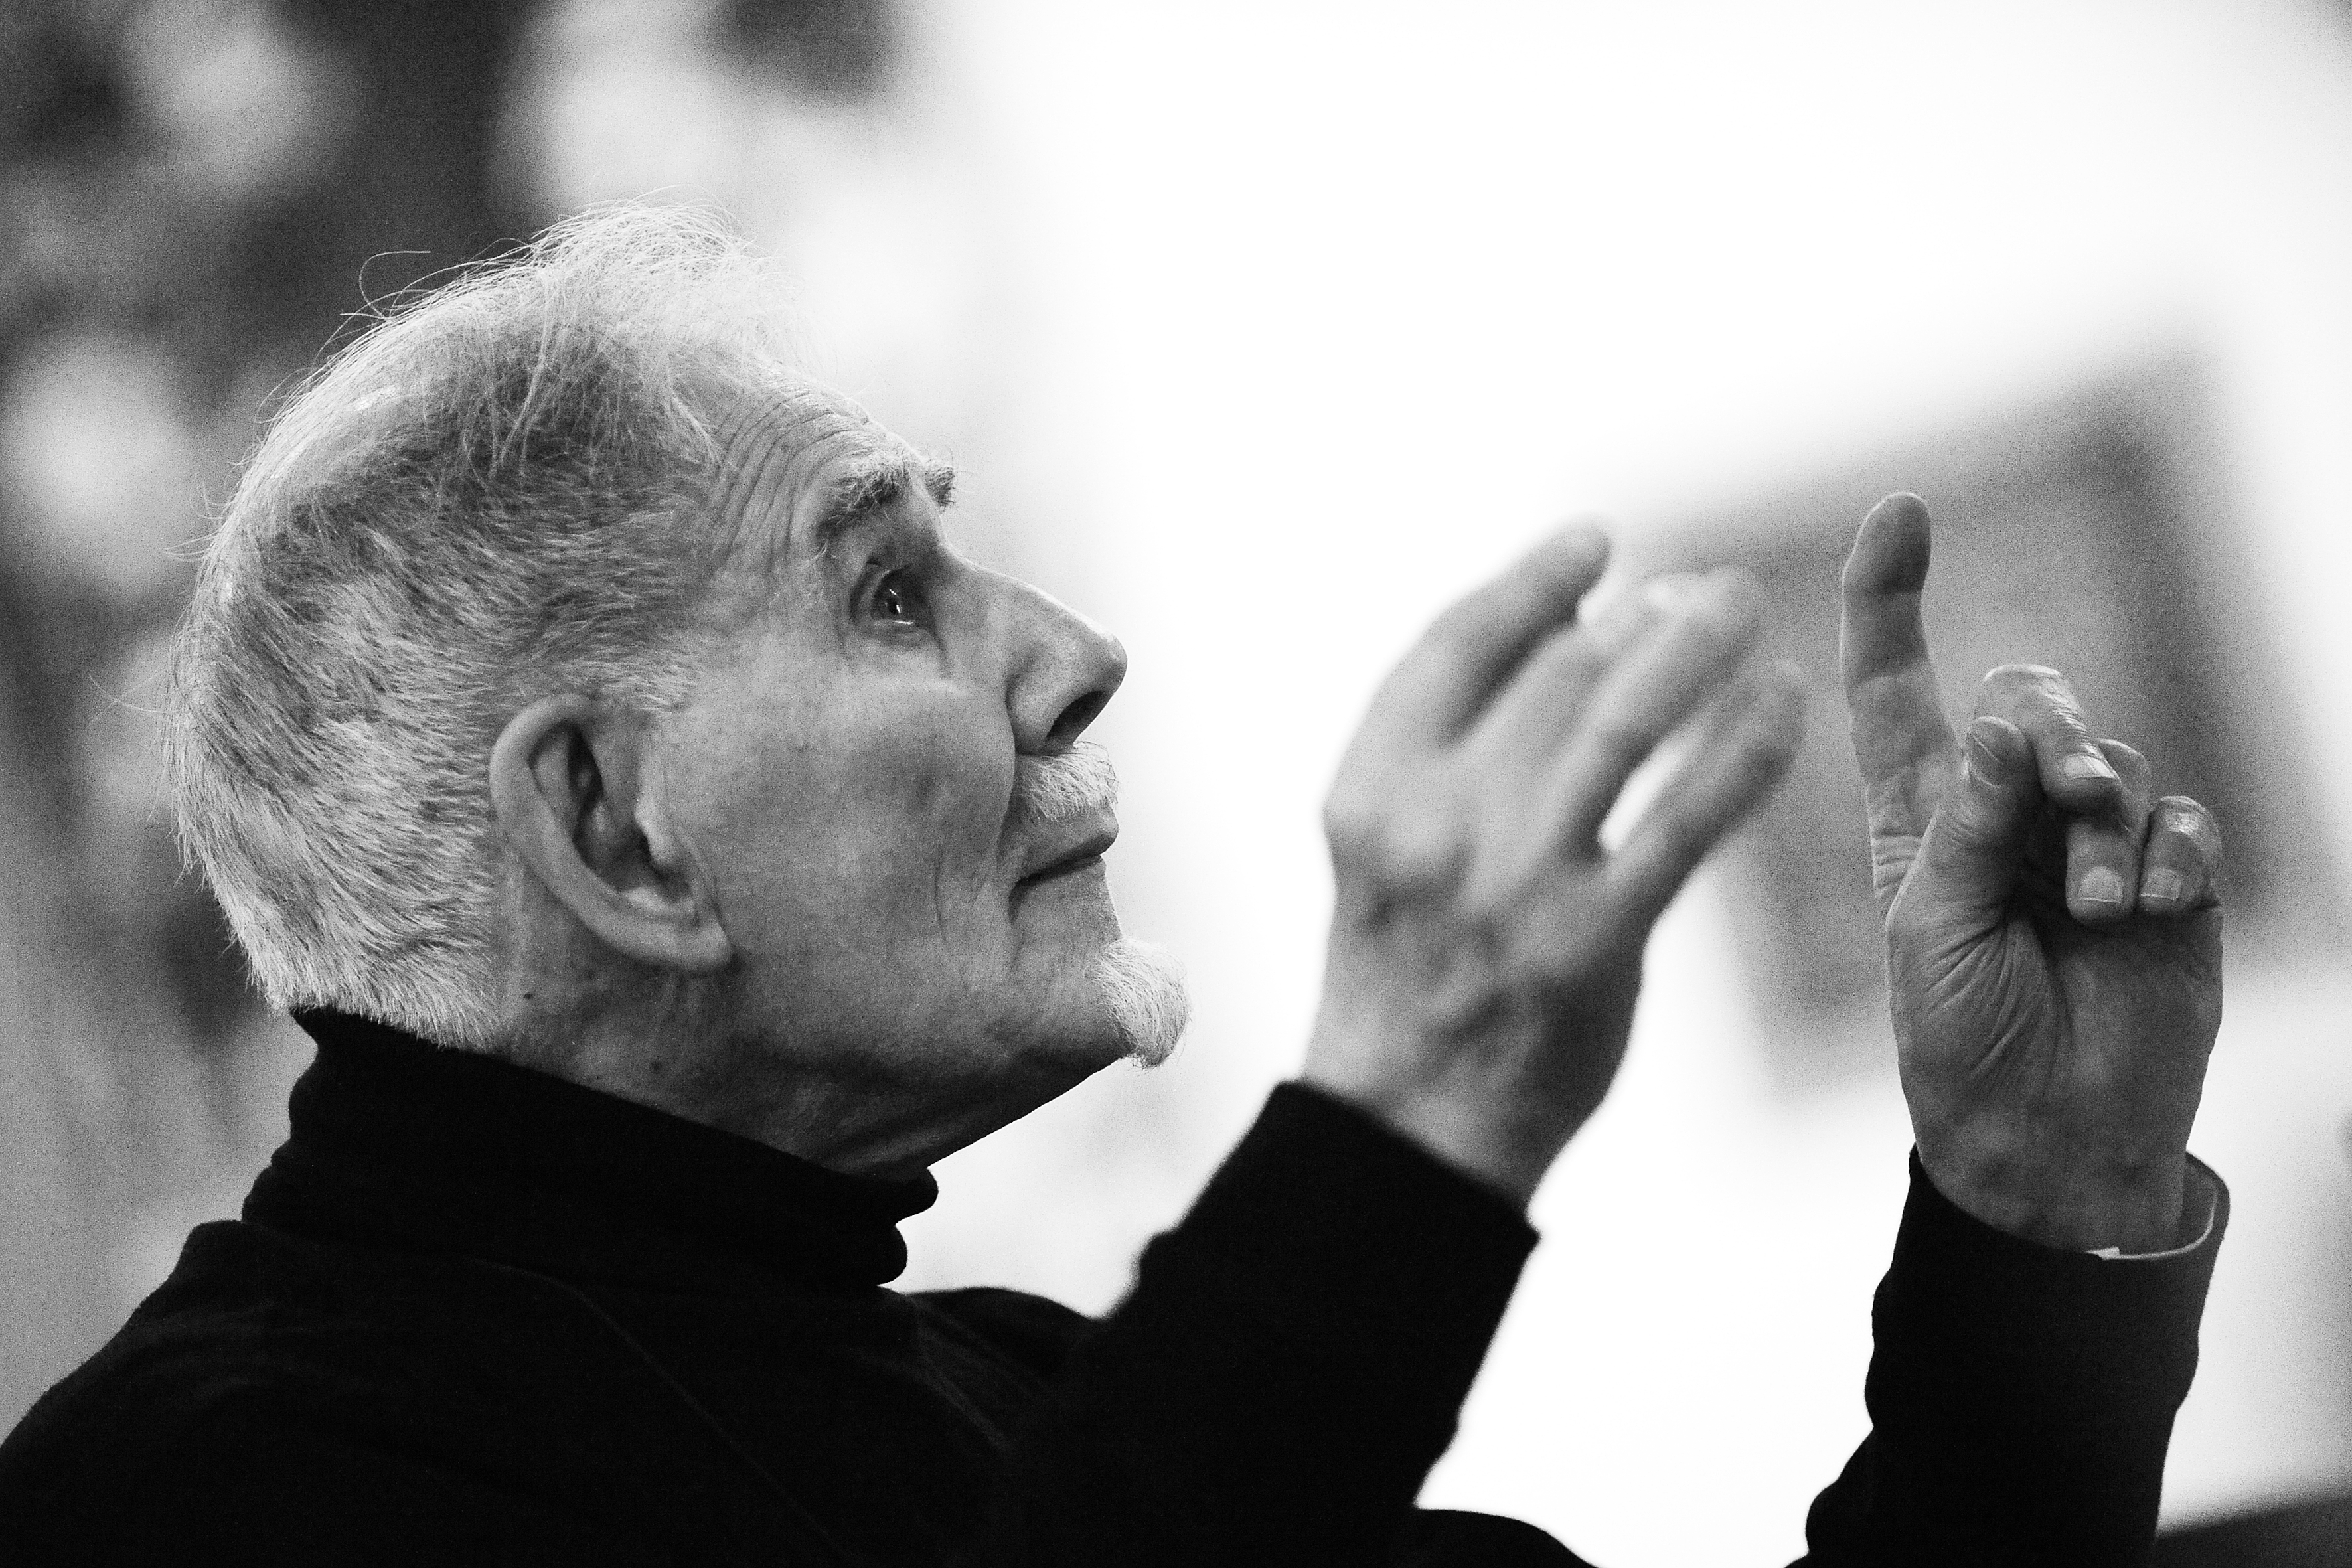 <p>Stephen Wilkinson at 90 in 2009 conducting the William Byrd Singers </p>